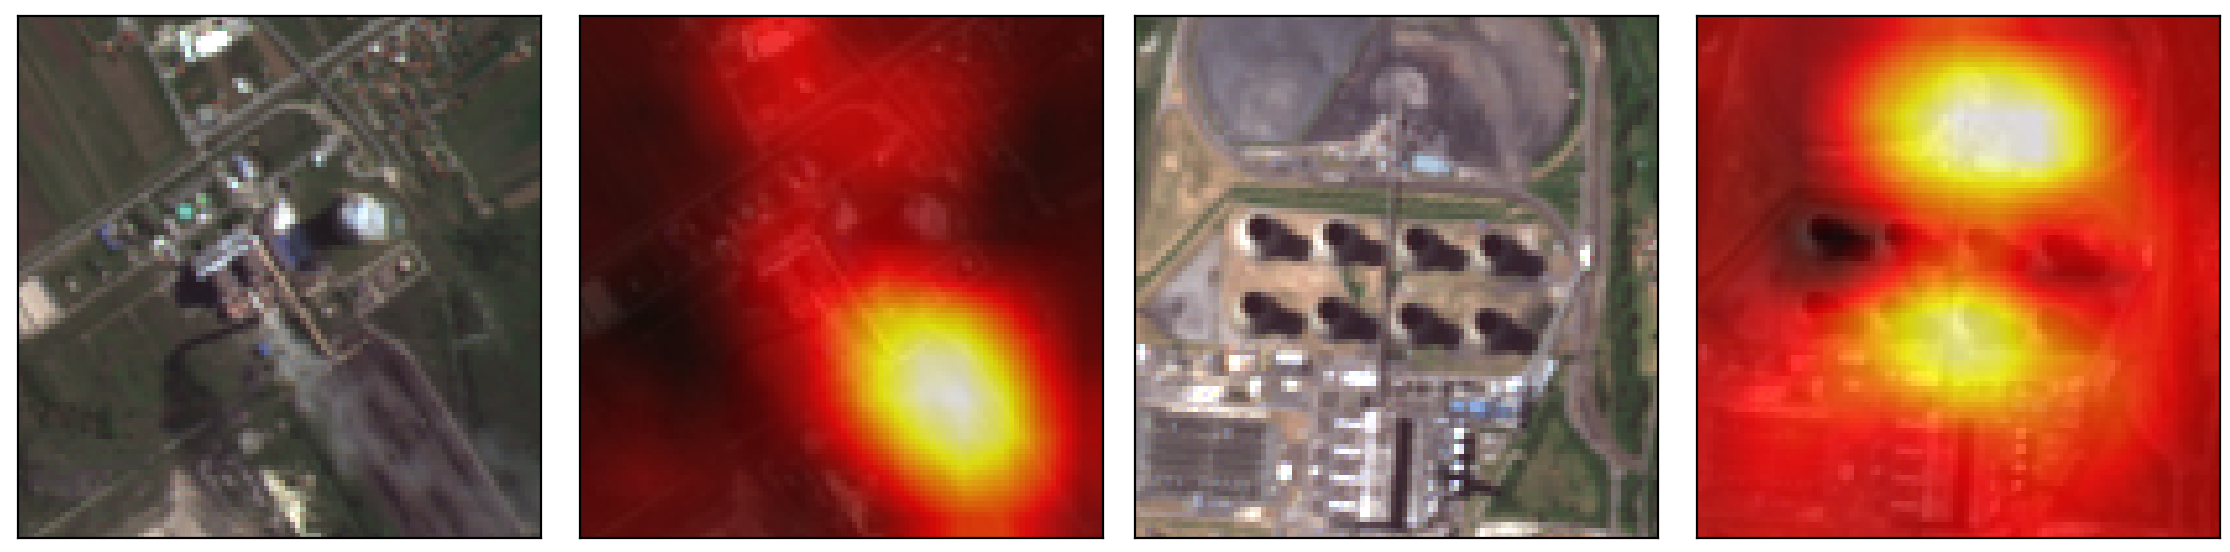 Example images and class activation maps for two coal
power plants from our sample that were correctly identified. The
heatmap plots highlight areas on which the trained model bases its
class prediction. In this case, the model focuses on the presence of
coal heaps that are indeed indicative of coal-powered plants.